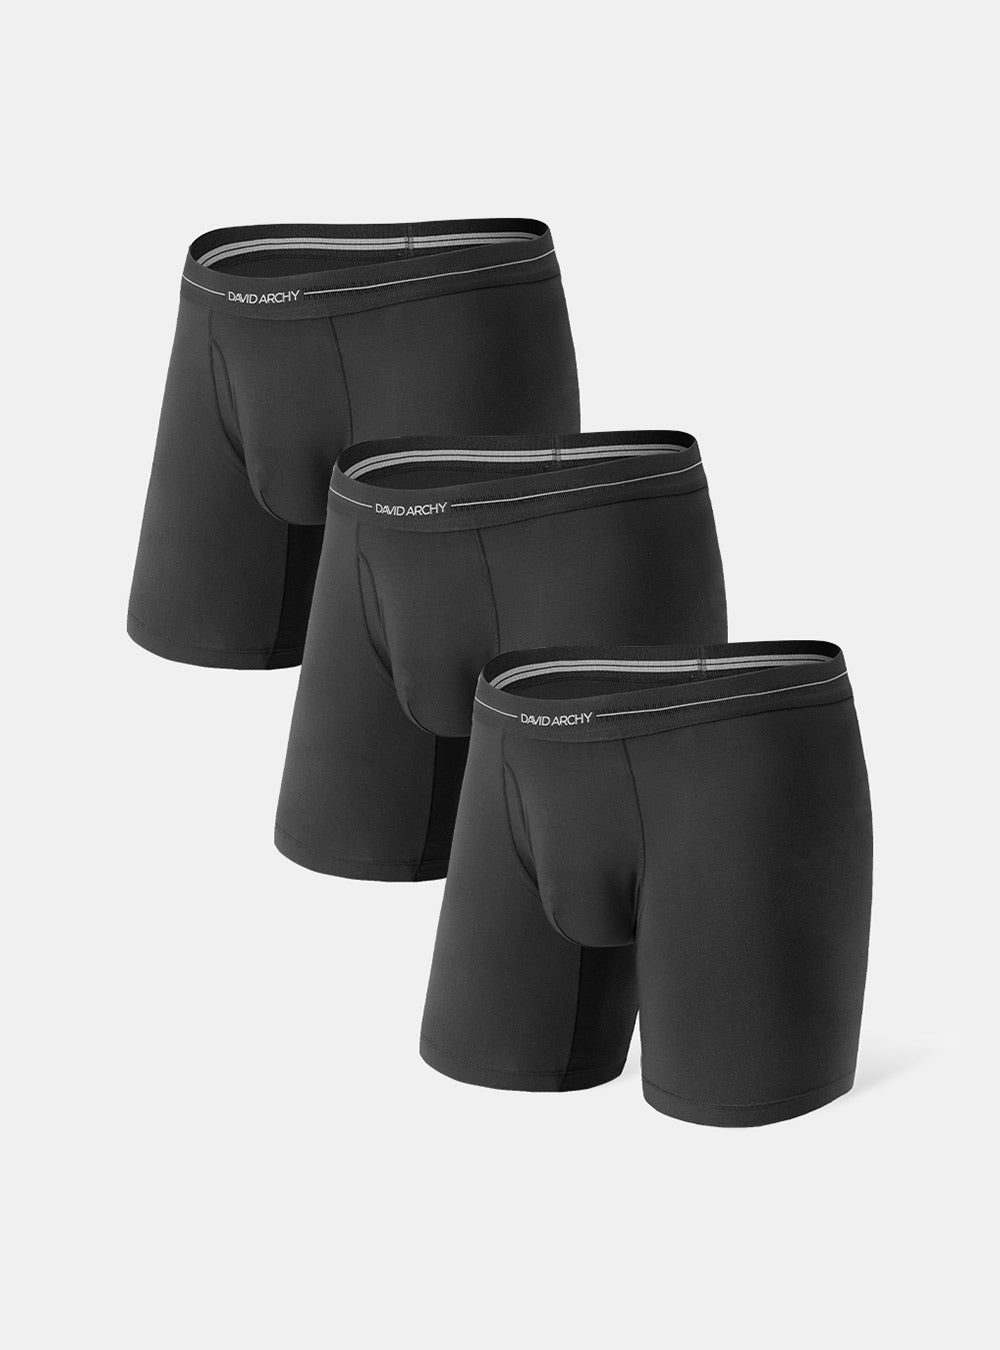 David Archy 3 Packs MicroModal Boxer Briefs with Pouch Support Elite Men's  Antibacterial Underwear